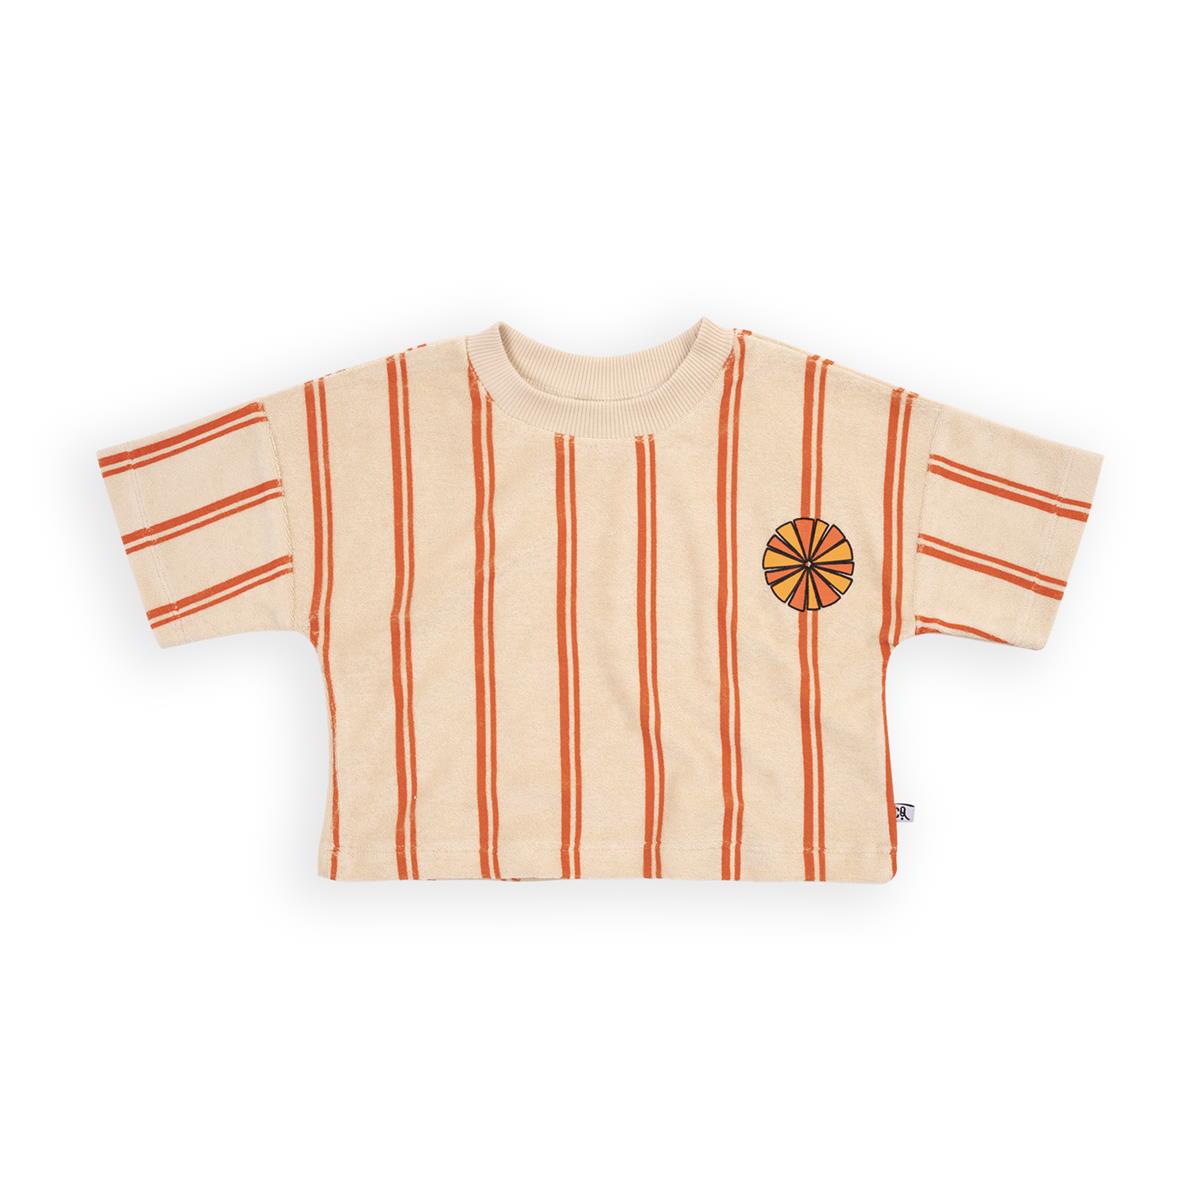 CarlijnQ - Stripes flame cropped t-shirt wt embroidery